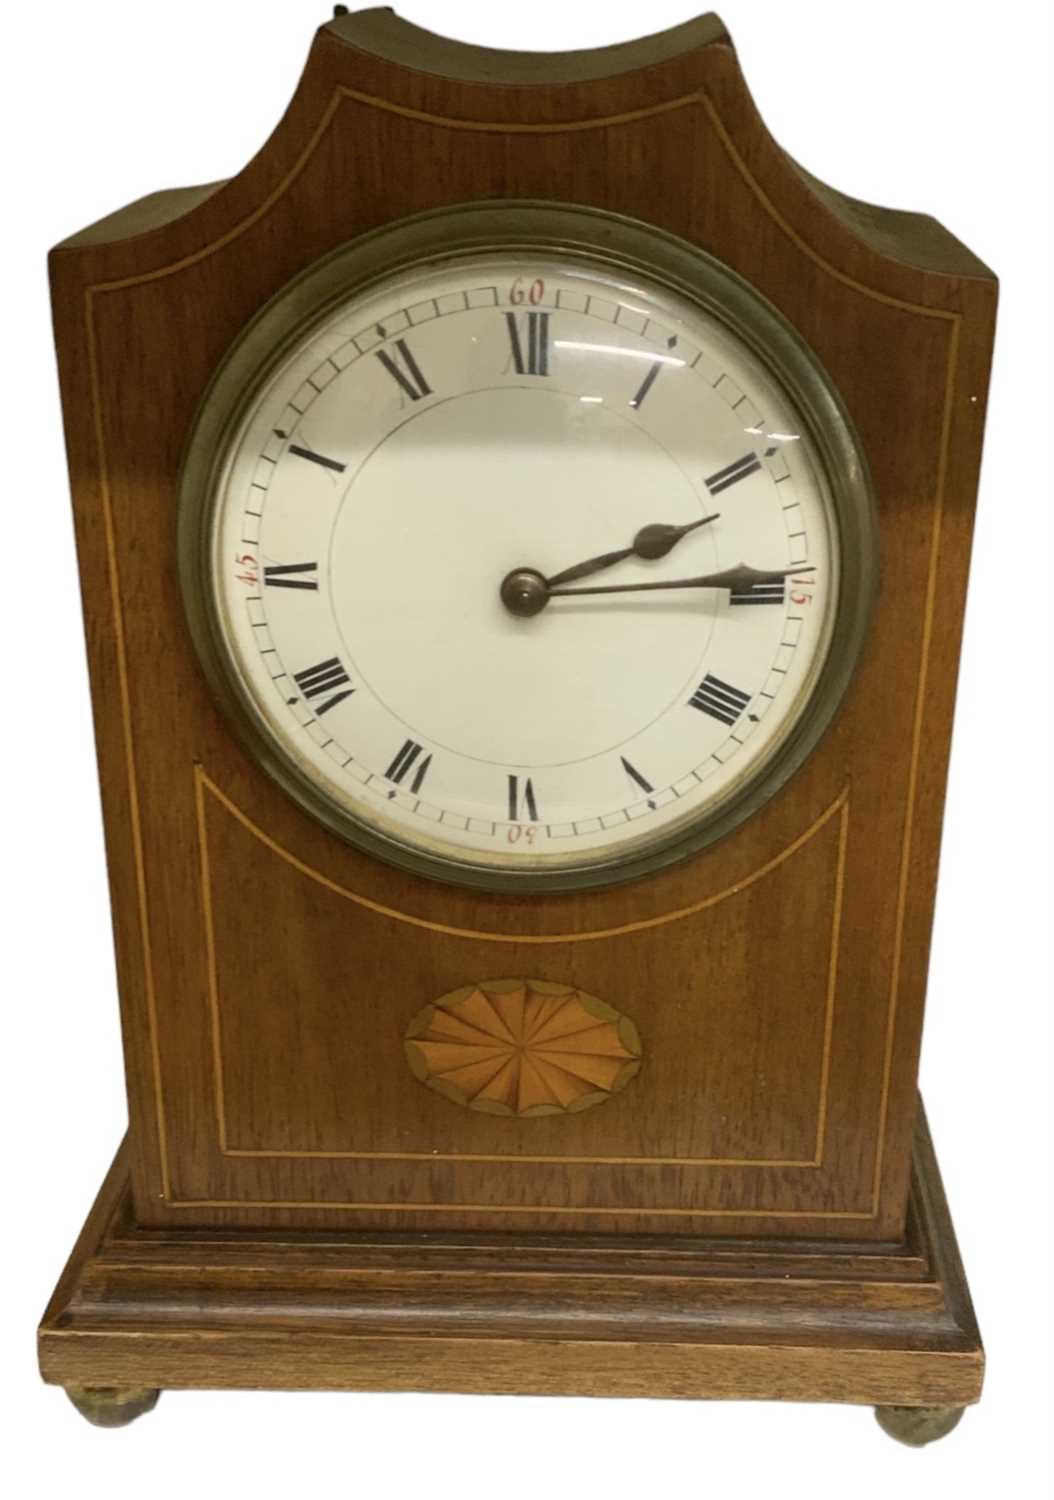 An Edwardian mahogany and inlaid mantel clock, the white enamel dial set with Roman numerals, height